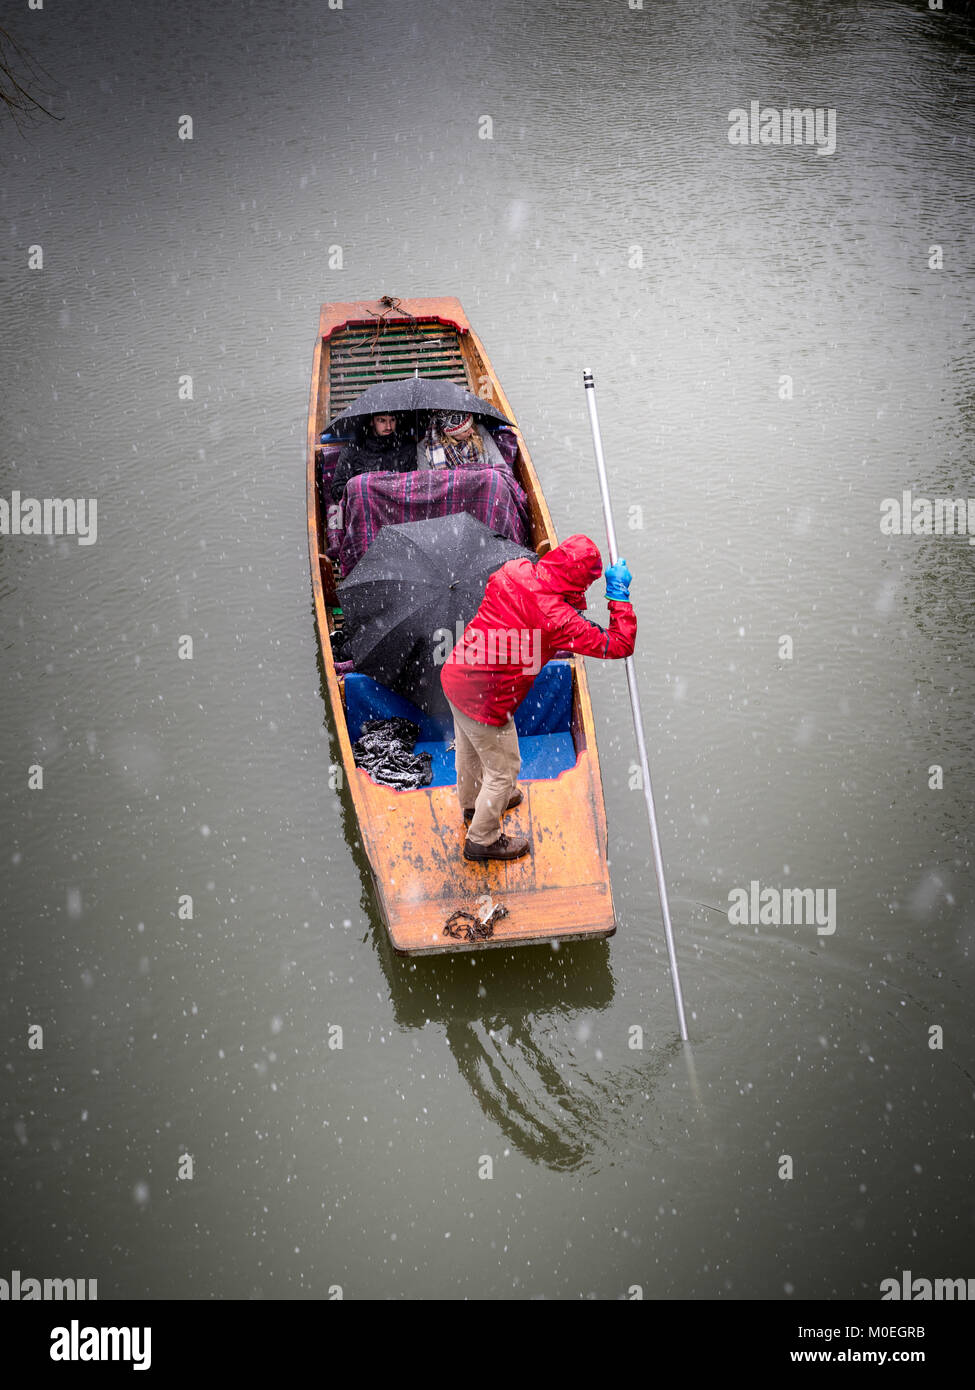 Winter Punting - Tourists huddle under blankets and umbrellas as they take a punt on the River Cam during snowy weather. Stock Photo